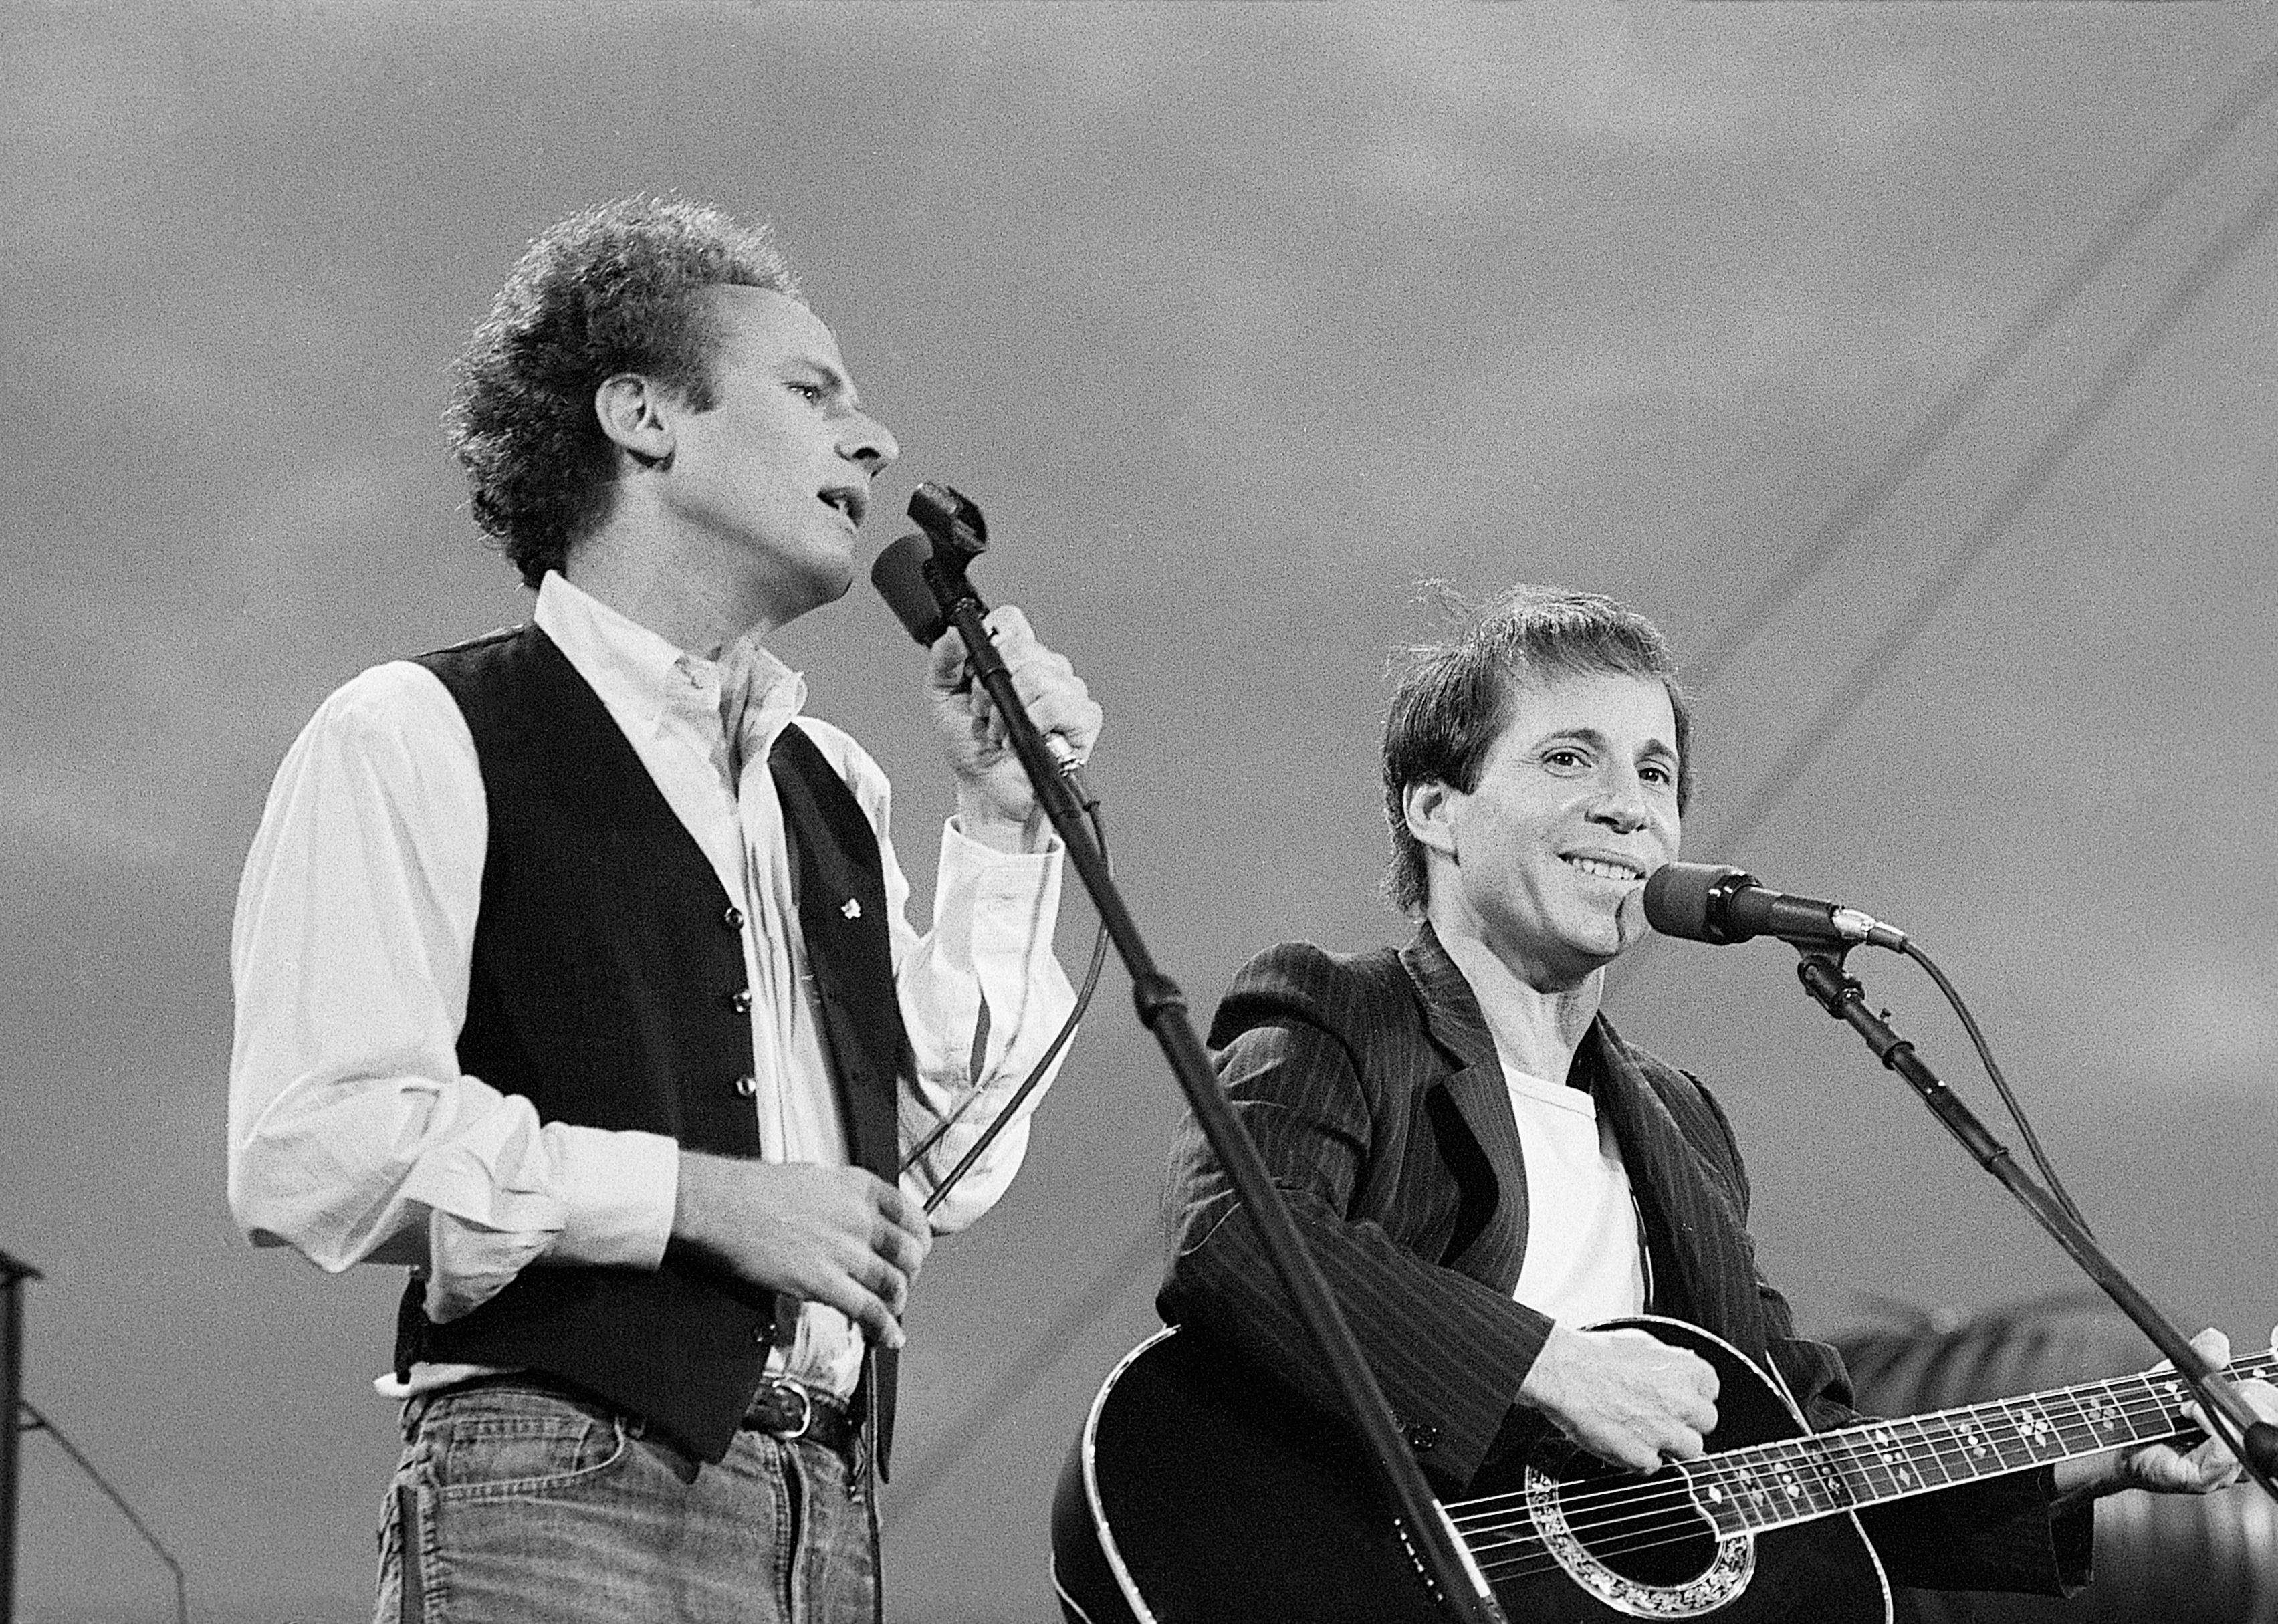 Art Garfunkel and Paul Simon perform for more than 500,000 fans in Central Park.